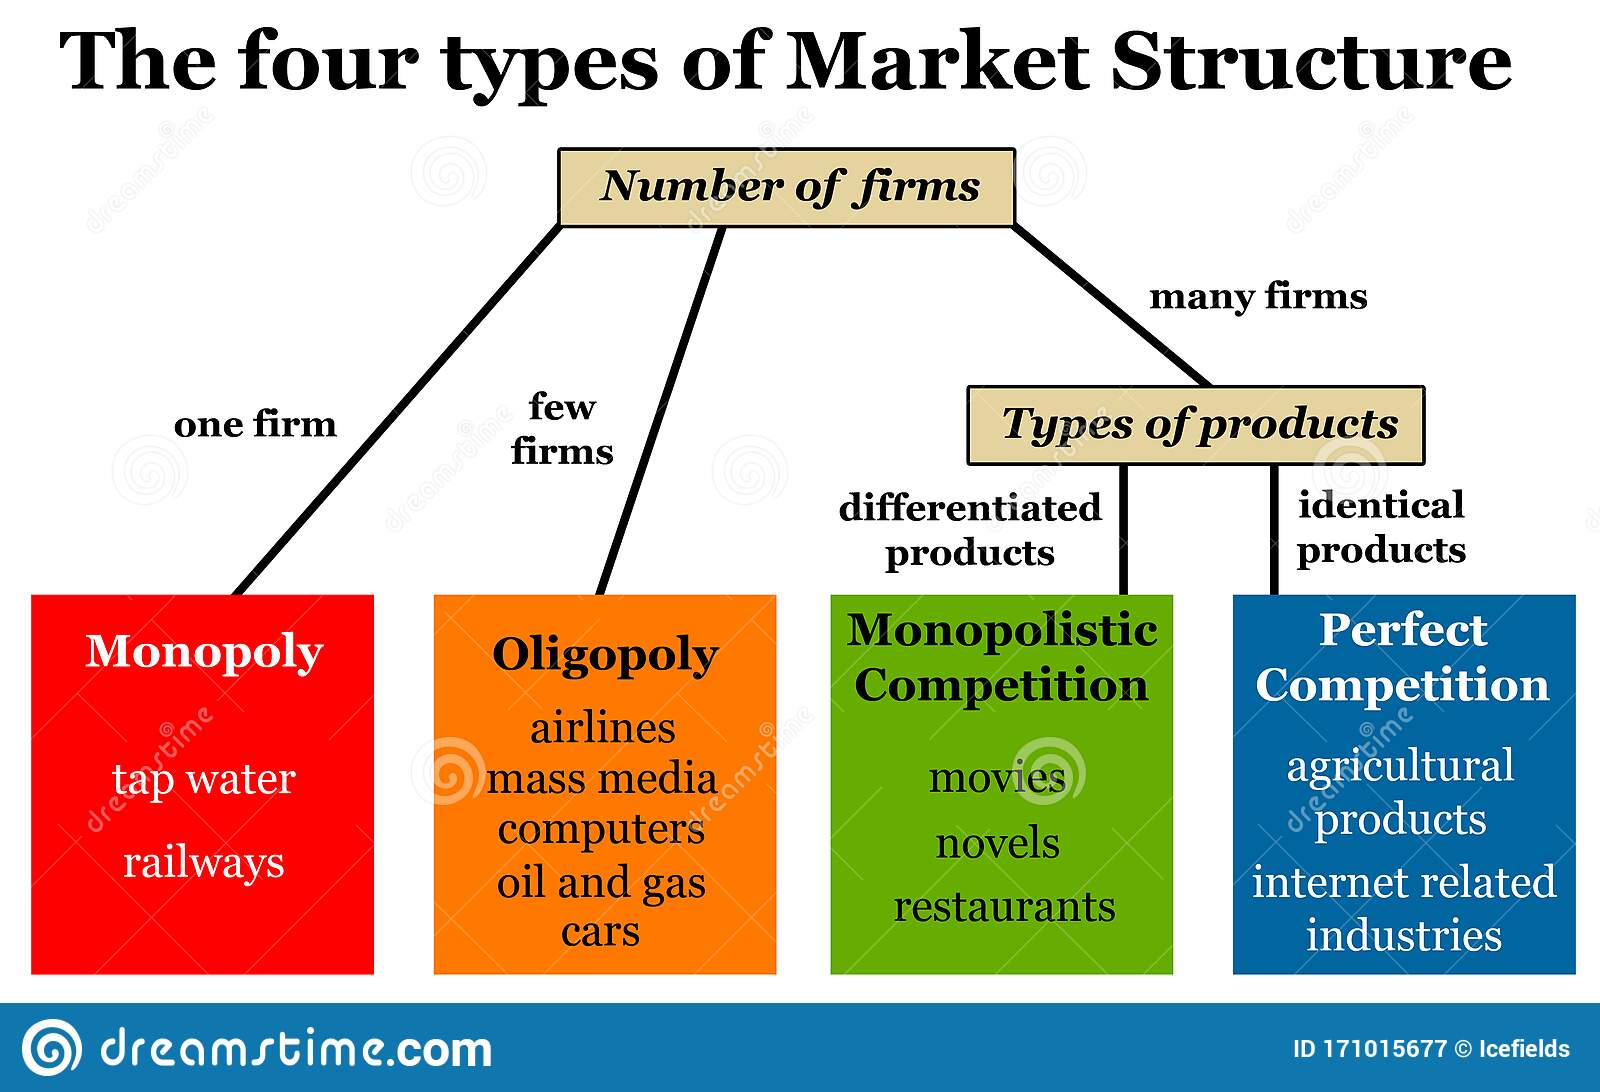 what are the different kinds of market structure